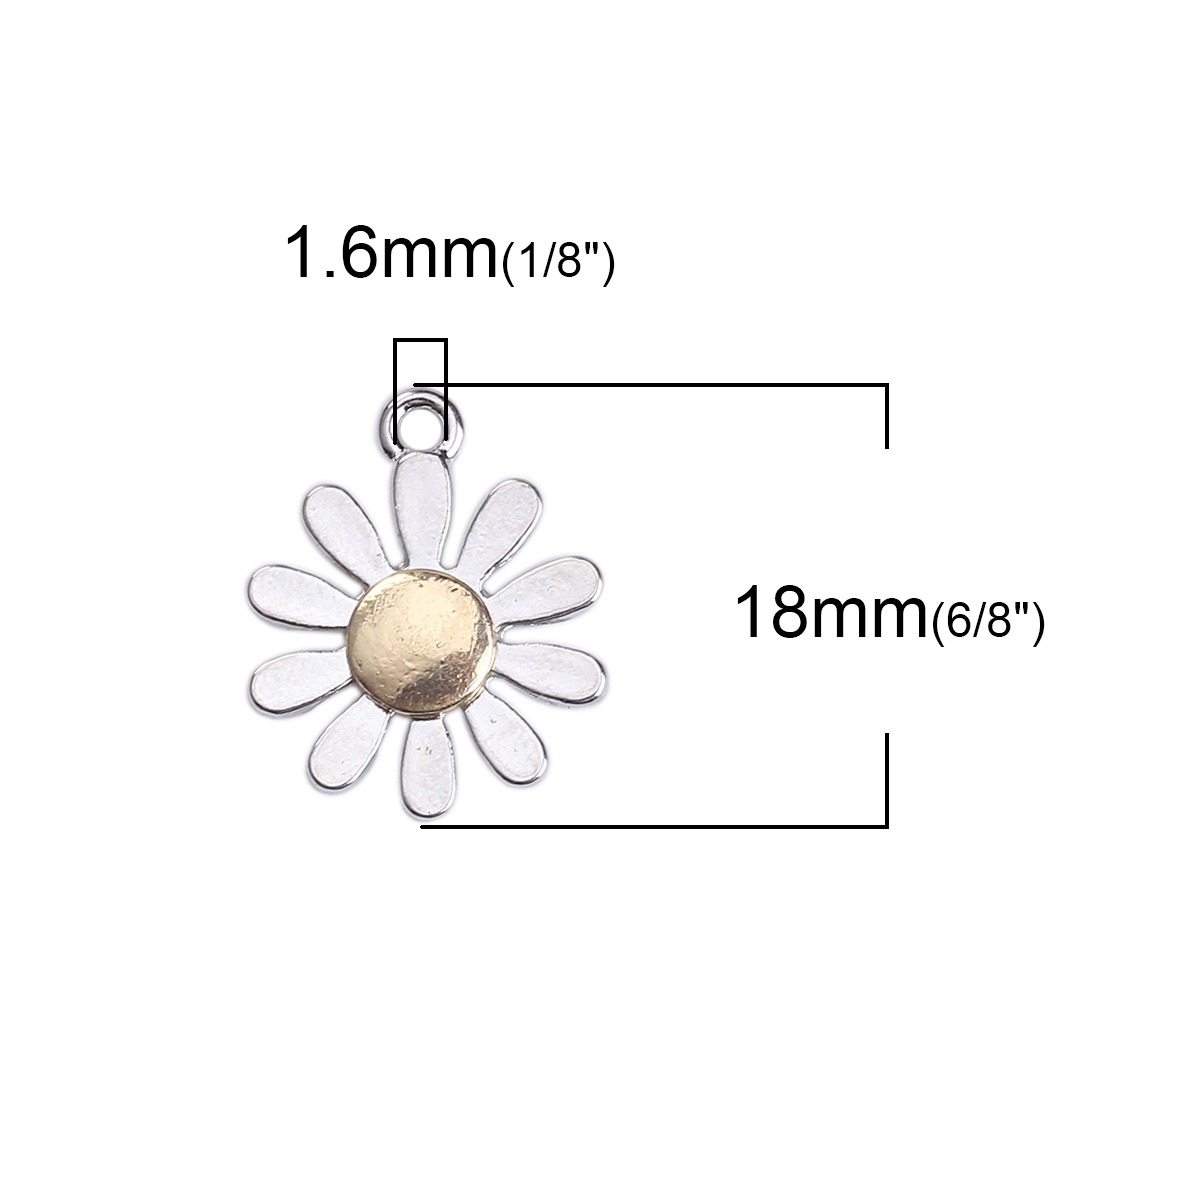 Picture of Zinc Based Alloy Charms Daisy Flower Gold Plated Silver Tone 18mm( 6/8") x 15mm( 5/8"), 5 PCs